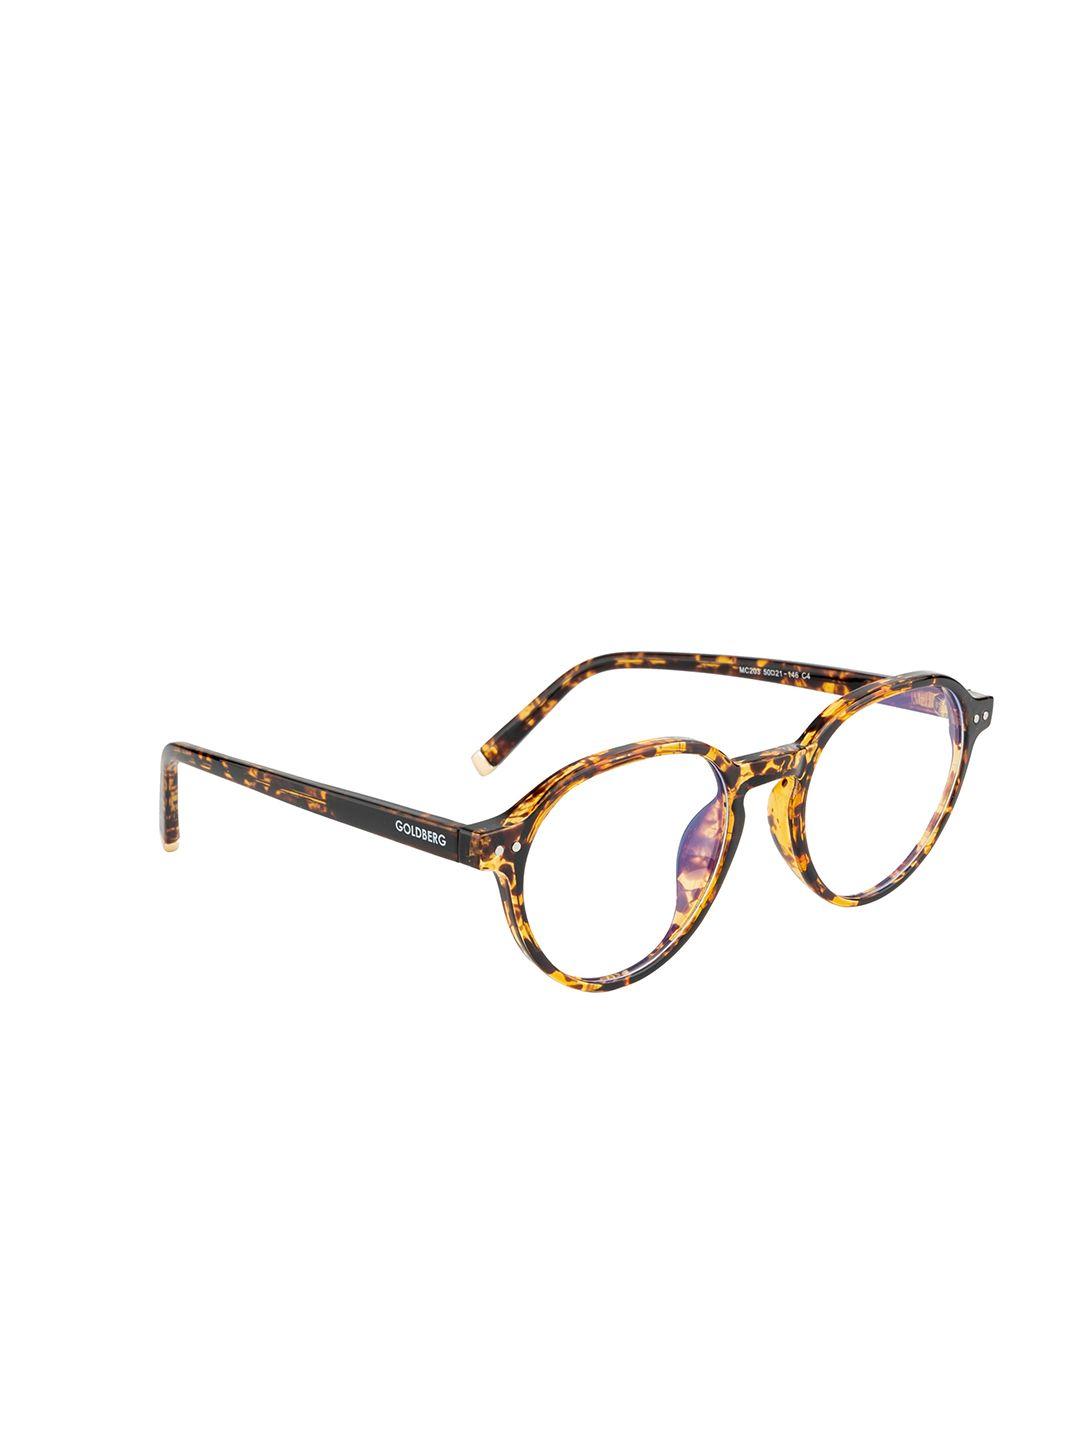 gold berg unisex brown & yellow abstract full rim round frames